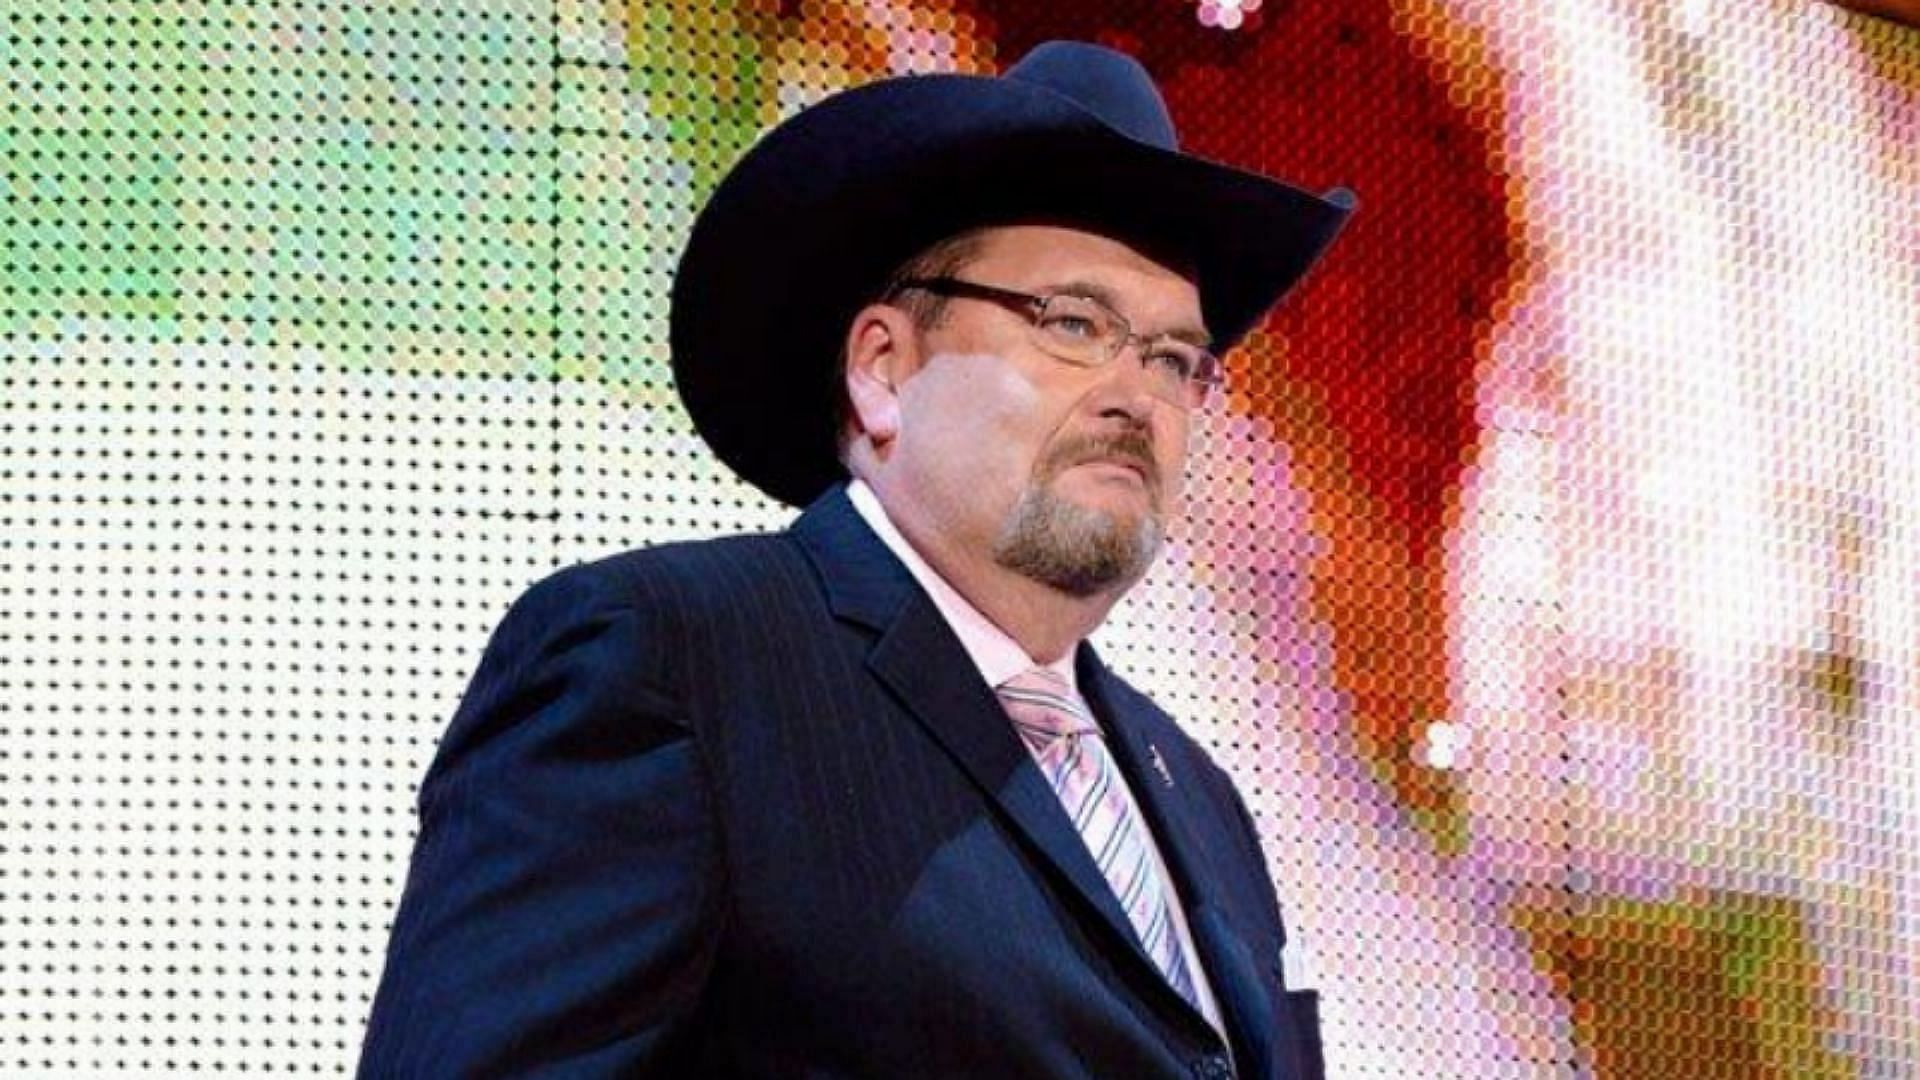 AEW announcer and WWE Hall of Famer Jim Ross